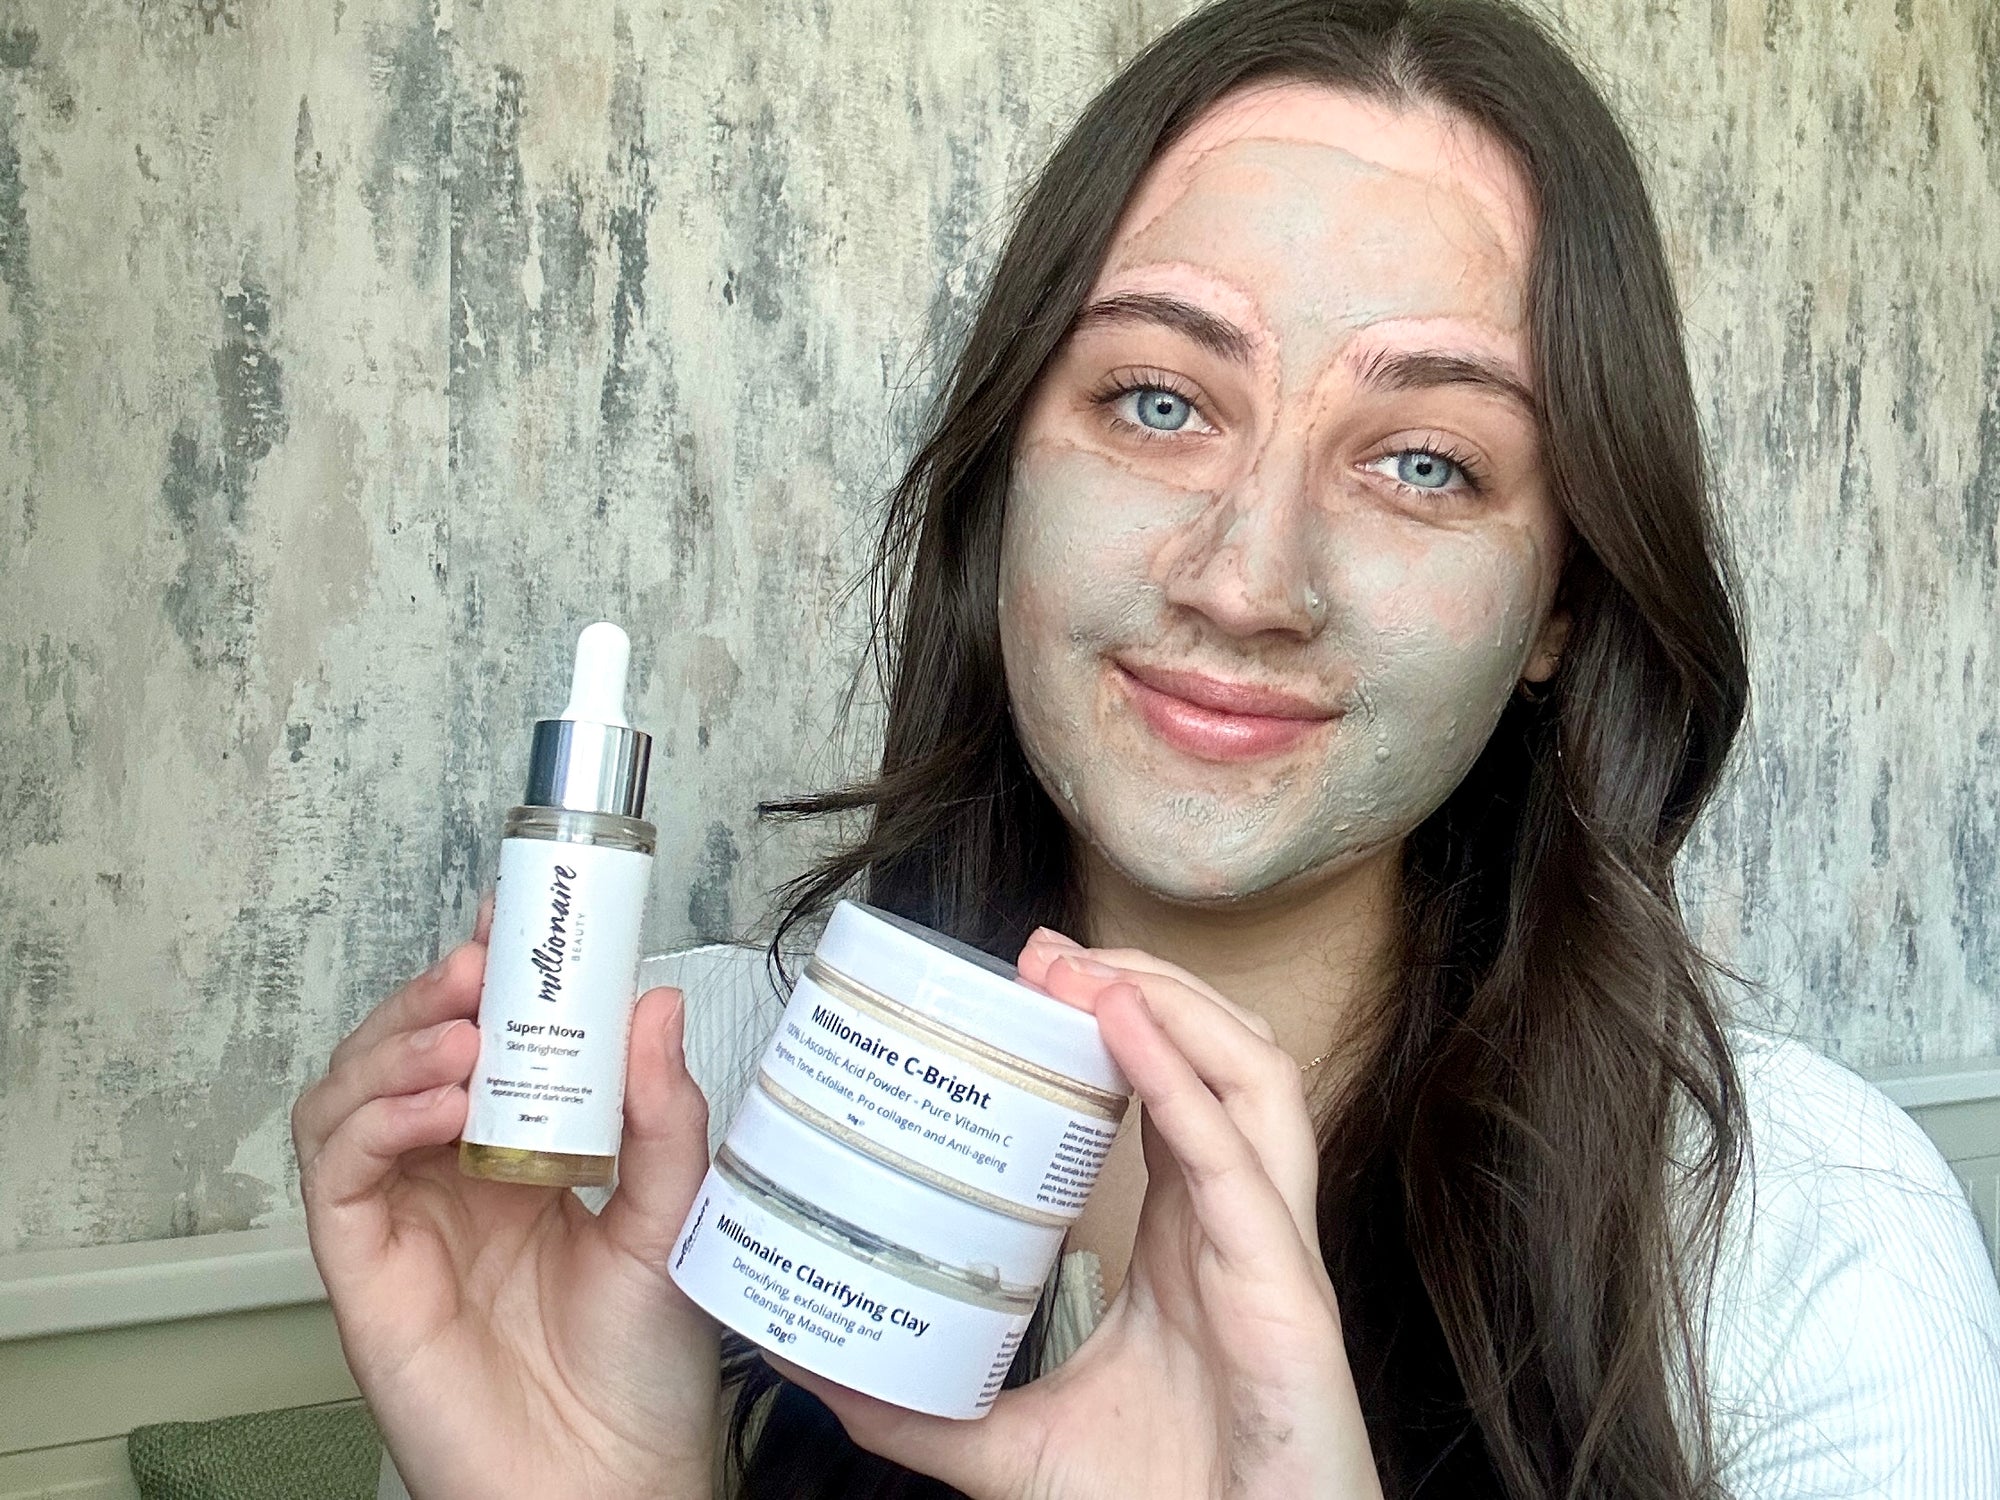 How To Make A Millionaire Beauty Detoxifying & Brightening Face Masque At Home